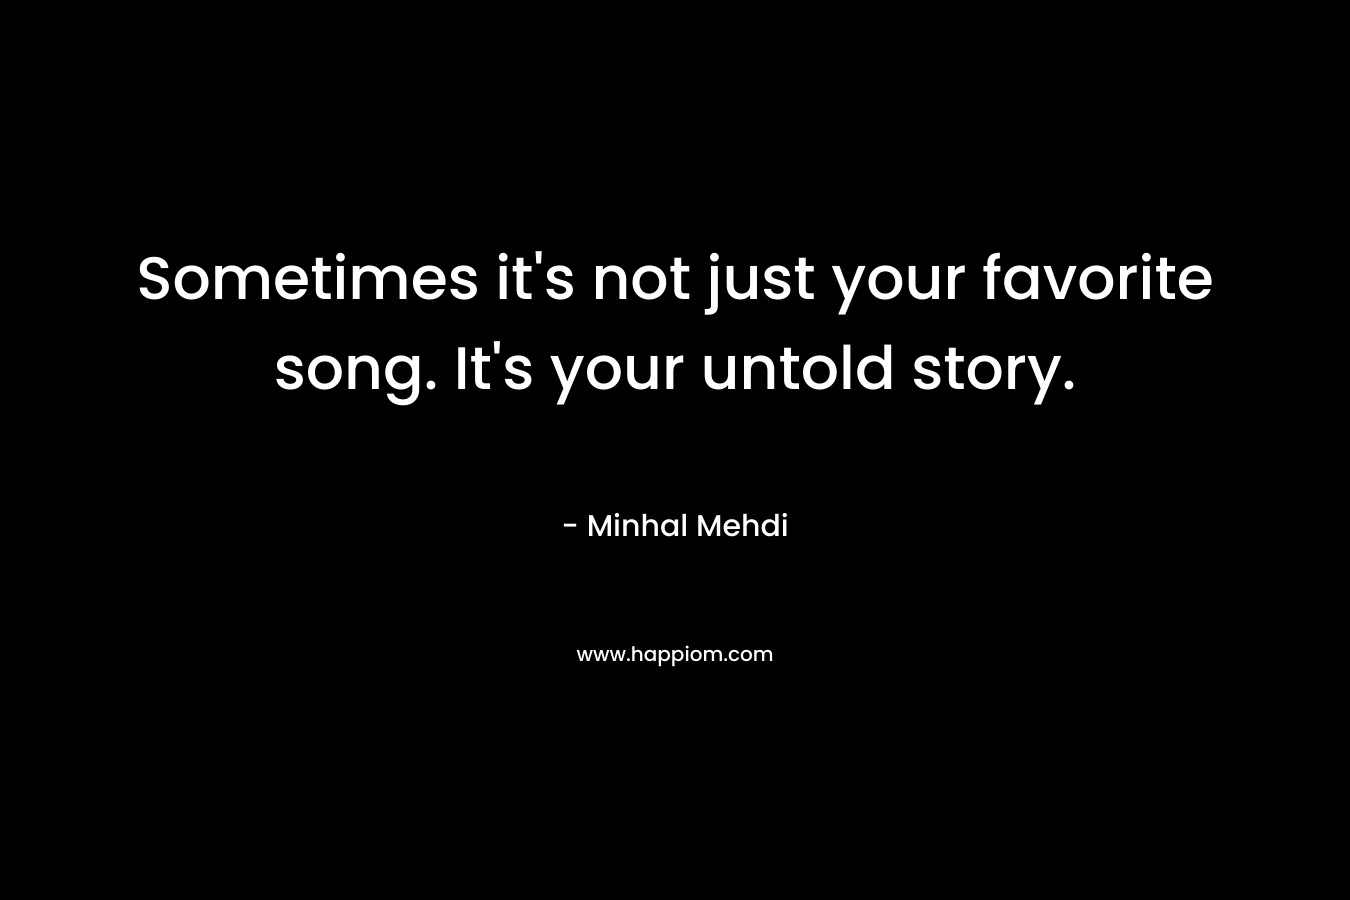 Sometimes it's not just your favorite song. It's your untold story.